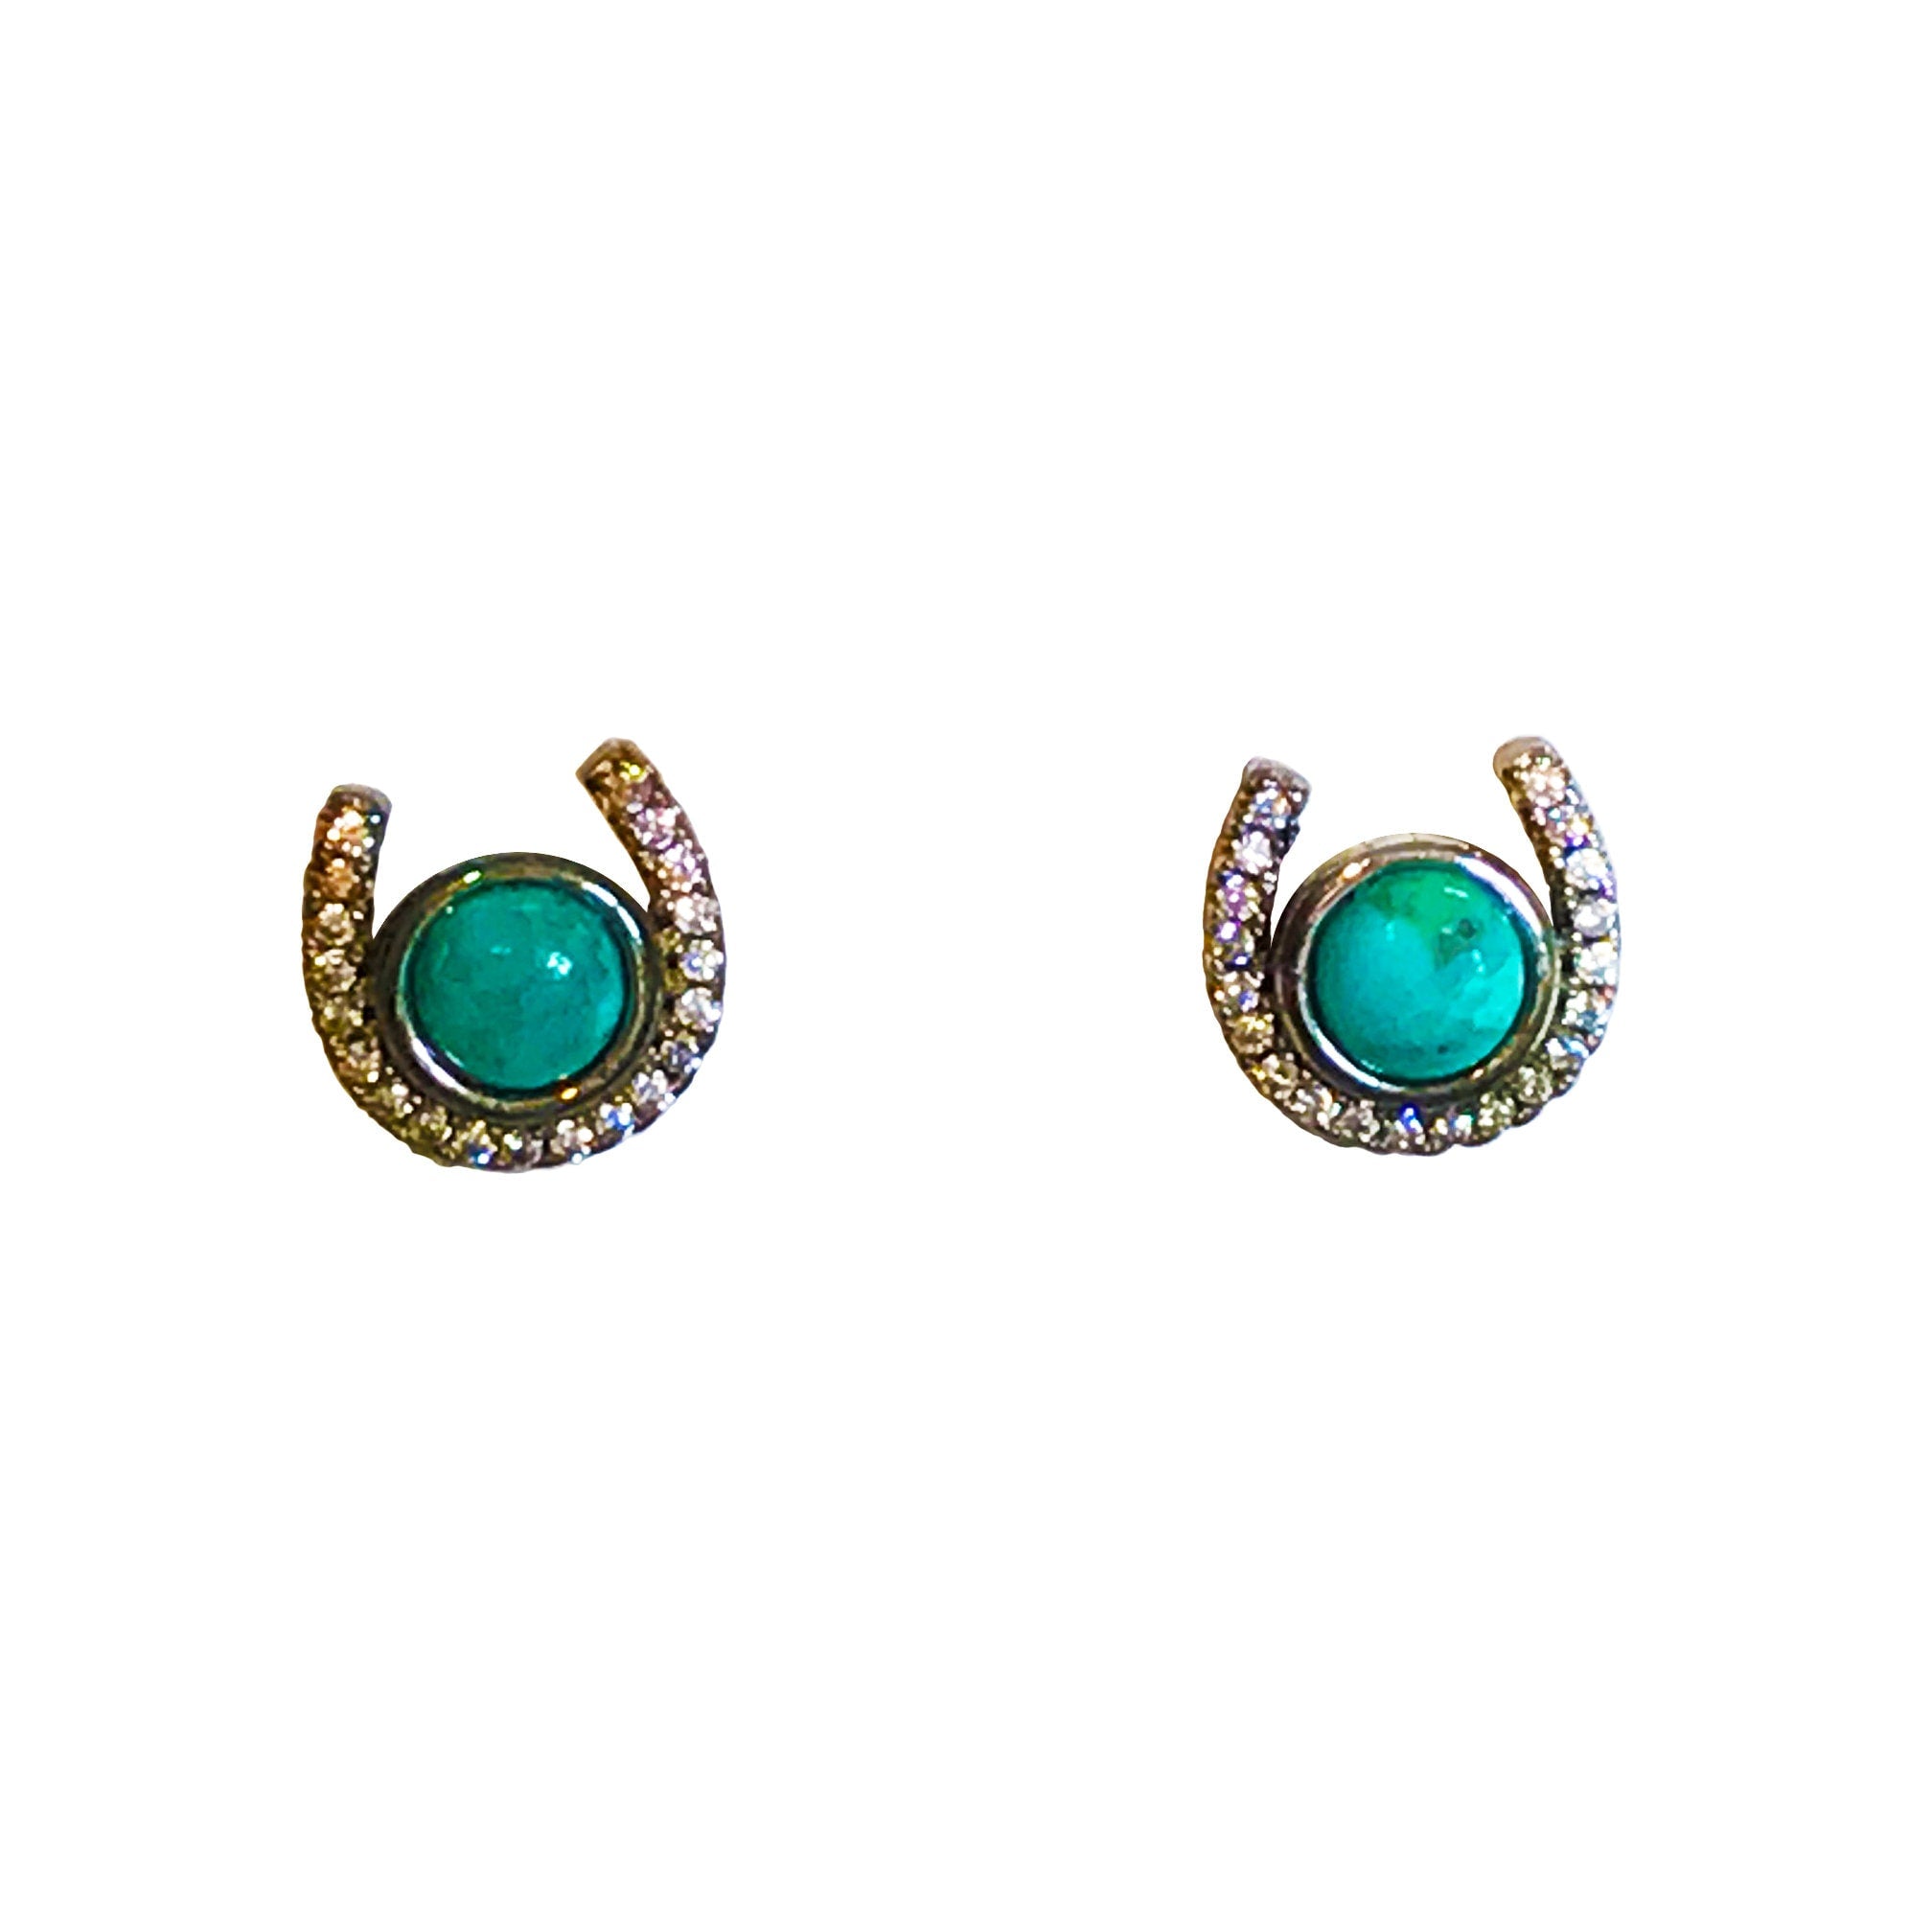 Sterling Silver Horseshoe Earrings with Turquoise and  CZs - 5 mm Turquoise